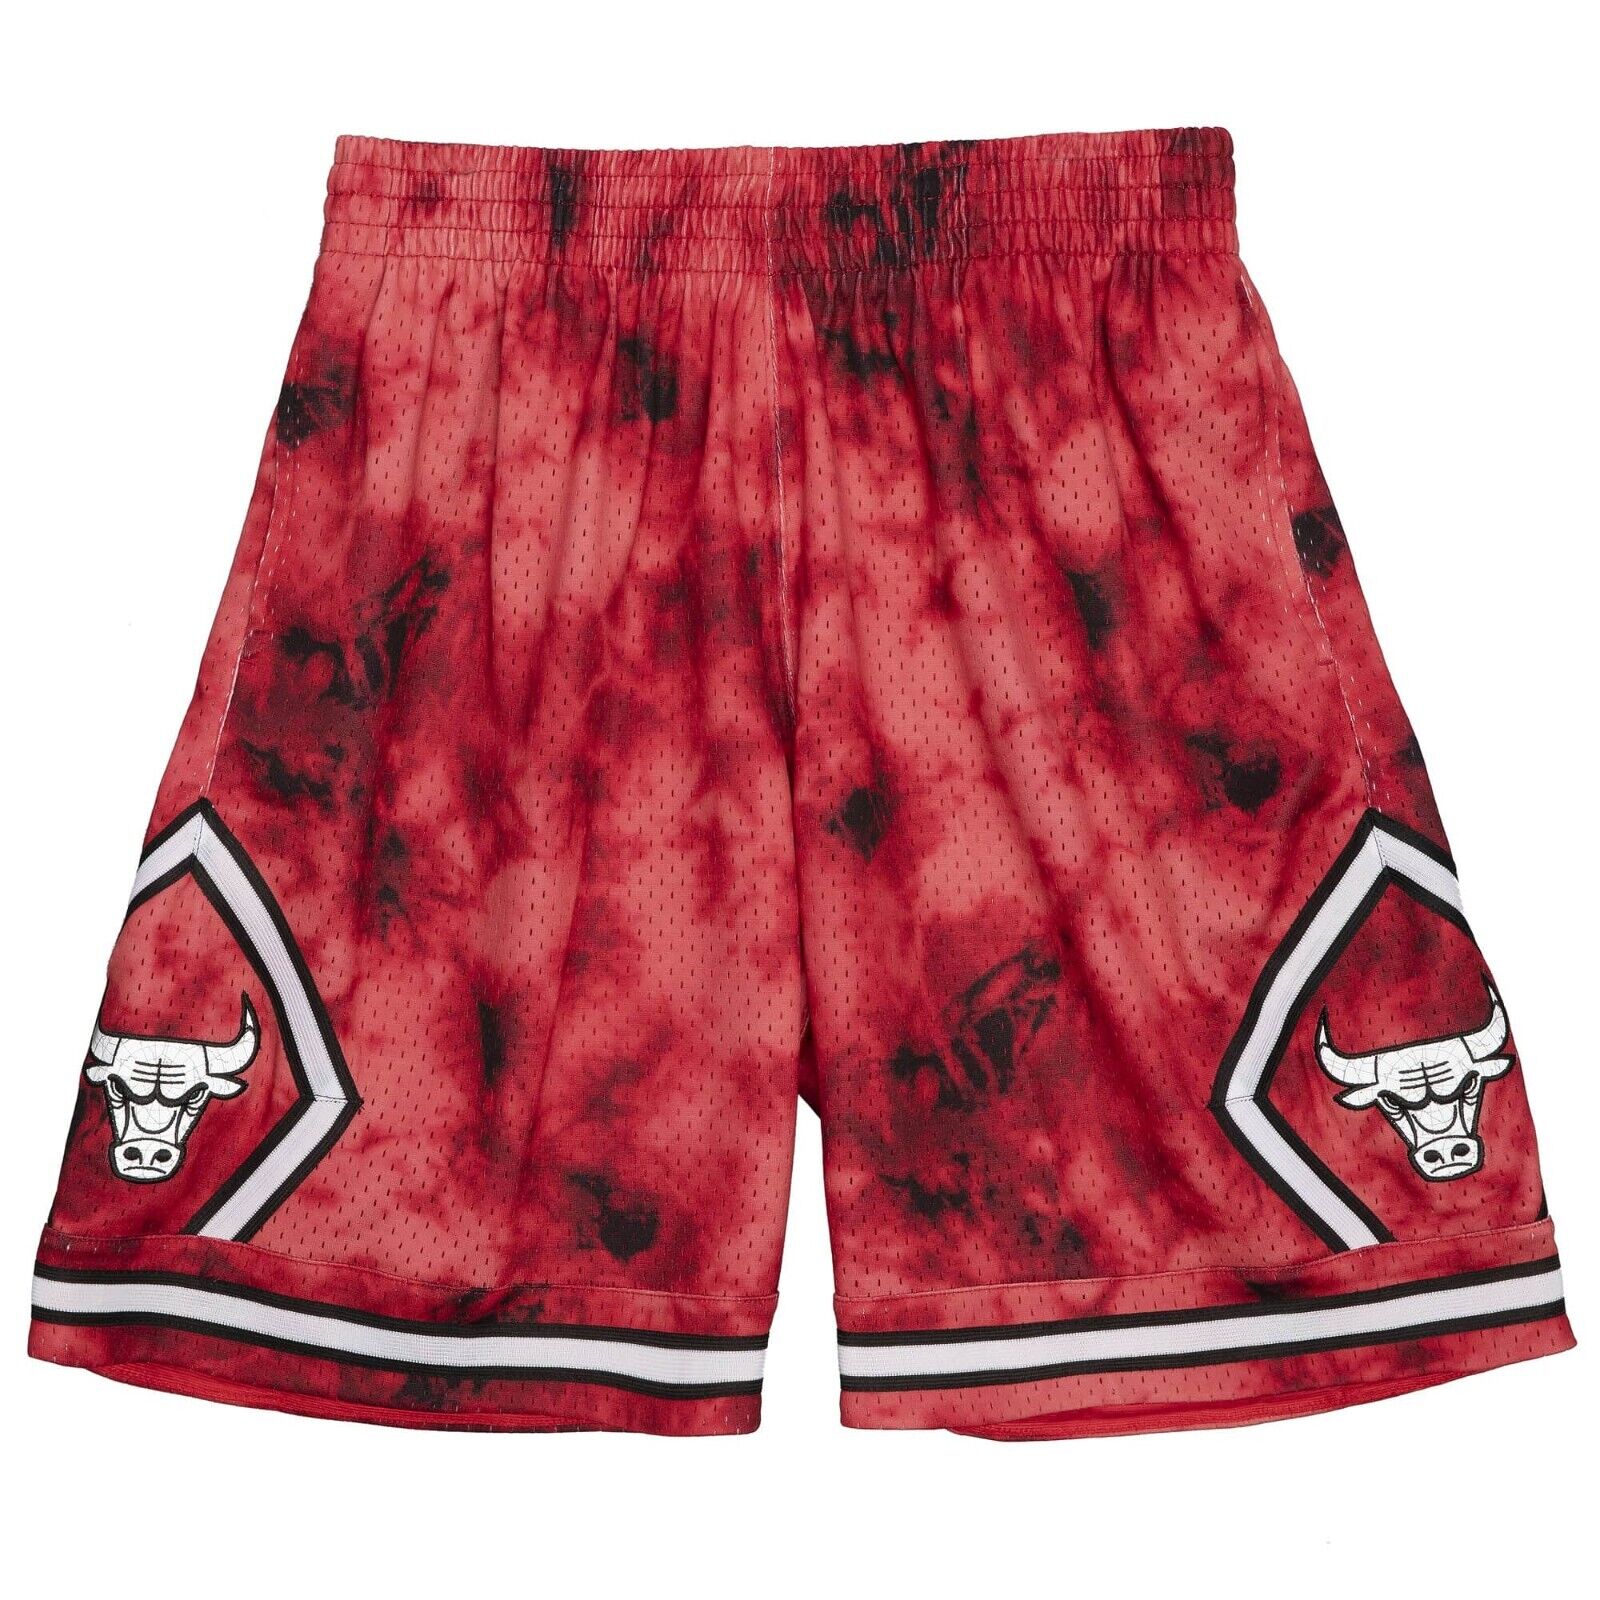 🏀 Get the NBA Swingman Shorts of the Chicago Bulls by Mitchell